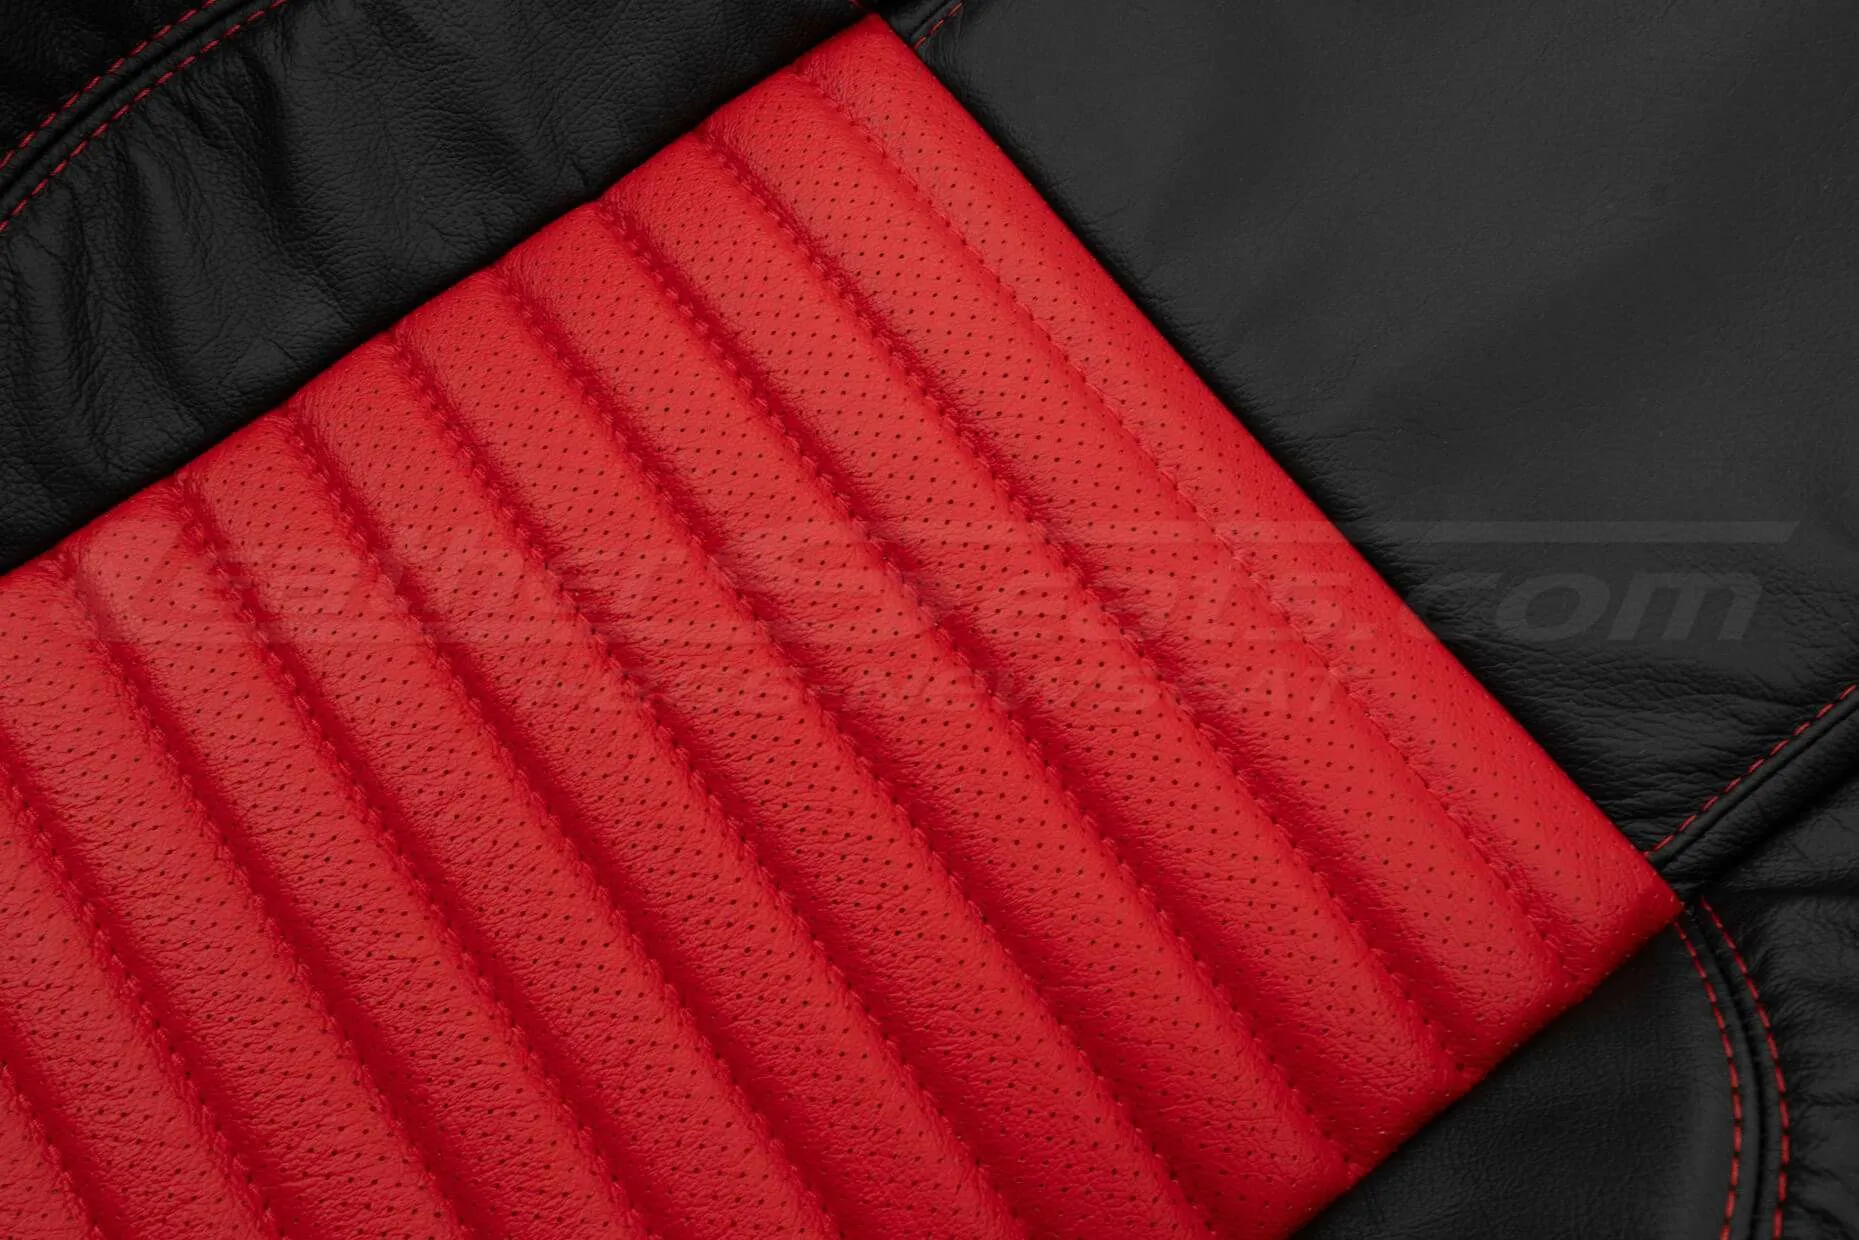 Bright Red Perforated Inserts close-up